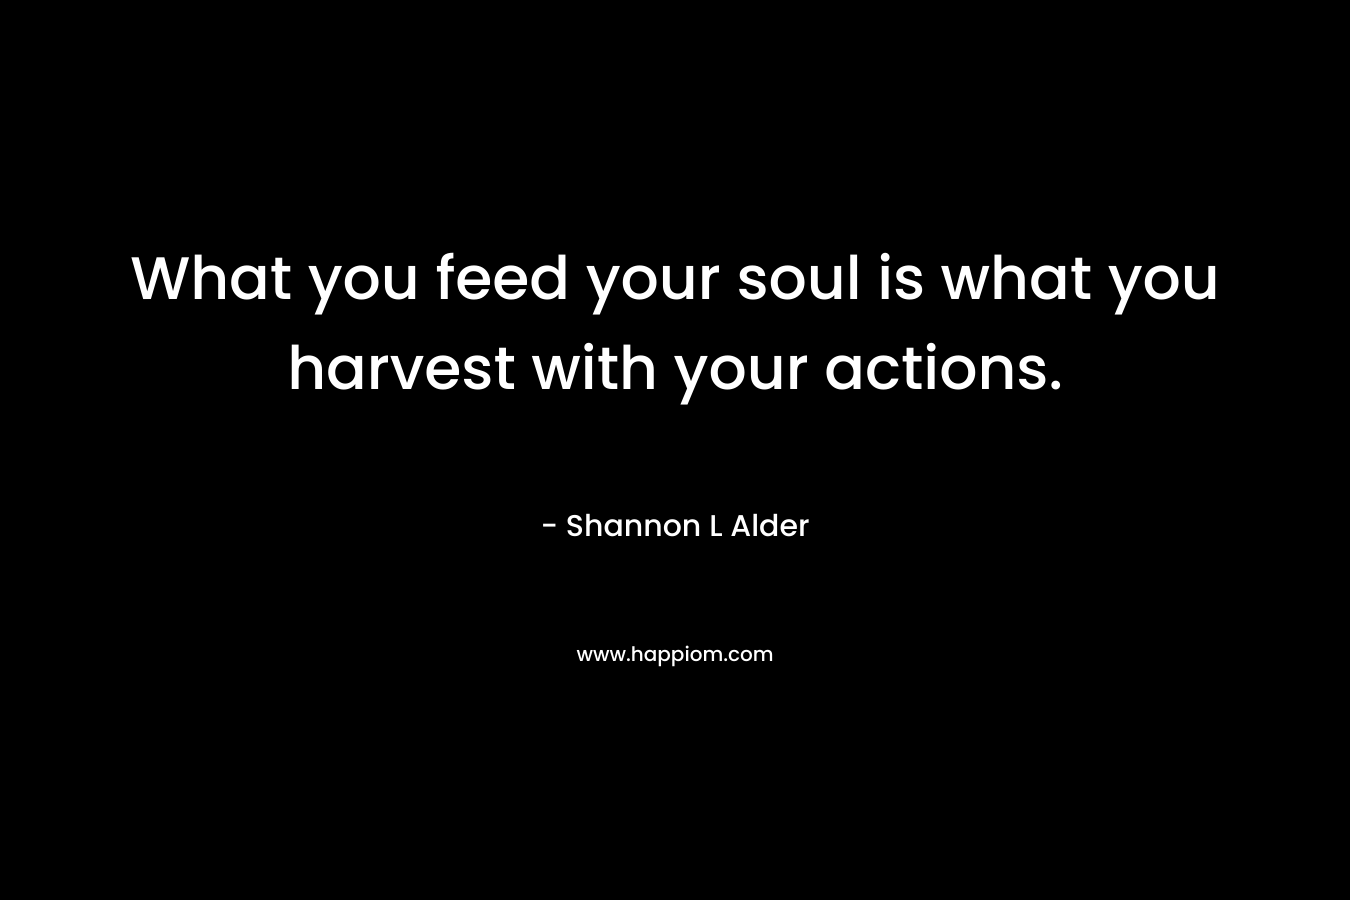 What you feed your soul is what you harvest with your actions.